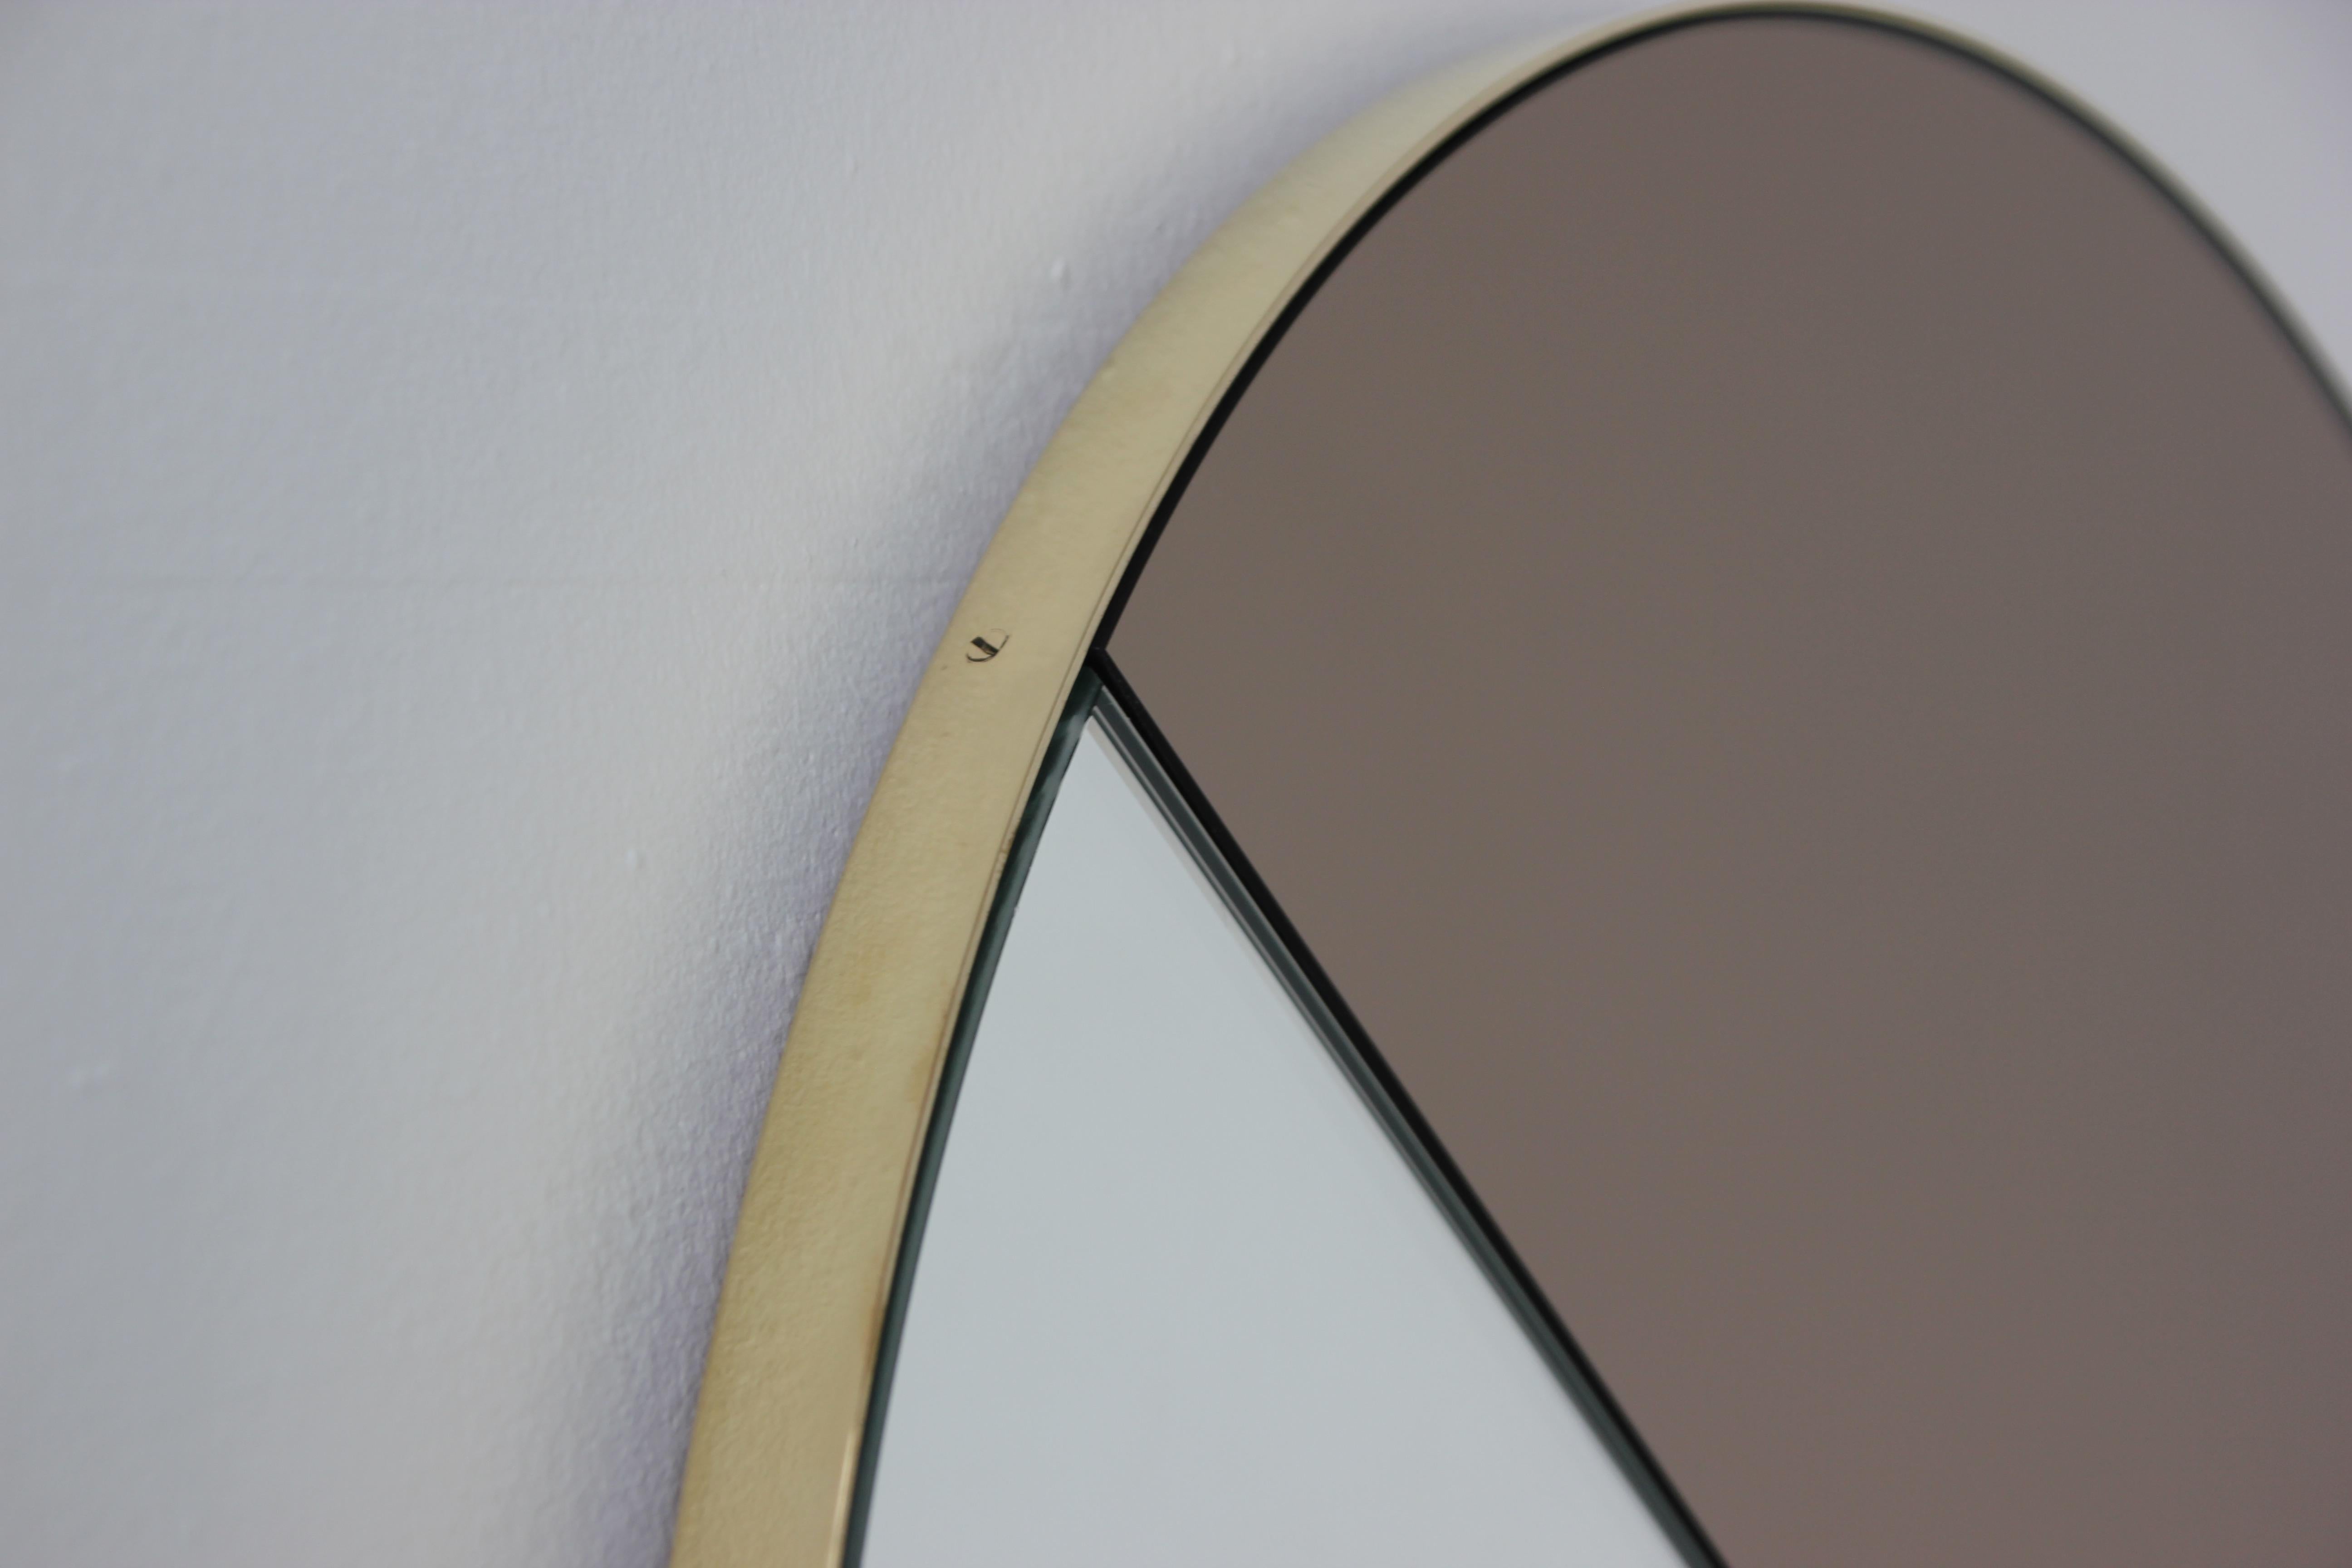 Contemporary mixed bronze and silver mirror tints Dualis Orbis with a brushed brass frame. Designed and handcrafted in London, UK.

All mirrors are fitted with an ingenious French cleat (split batten) system so they may hang flush with the wall in